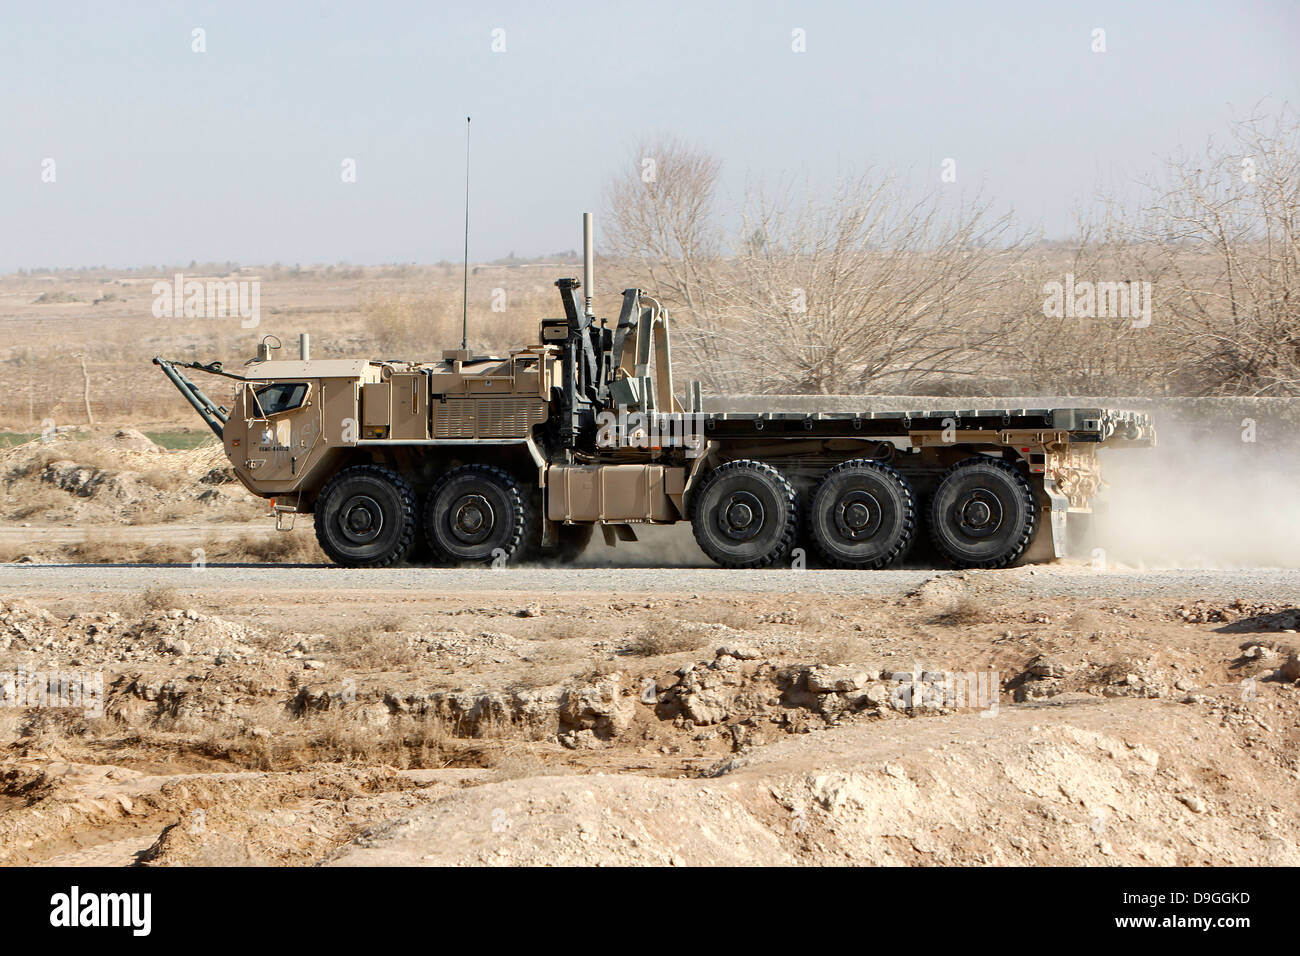 January 11, 2011 - A Logistics Vehicle System Replacement travels in the Marjah district of Helmand province, Afghanistan. Stock Photo